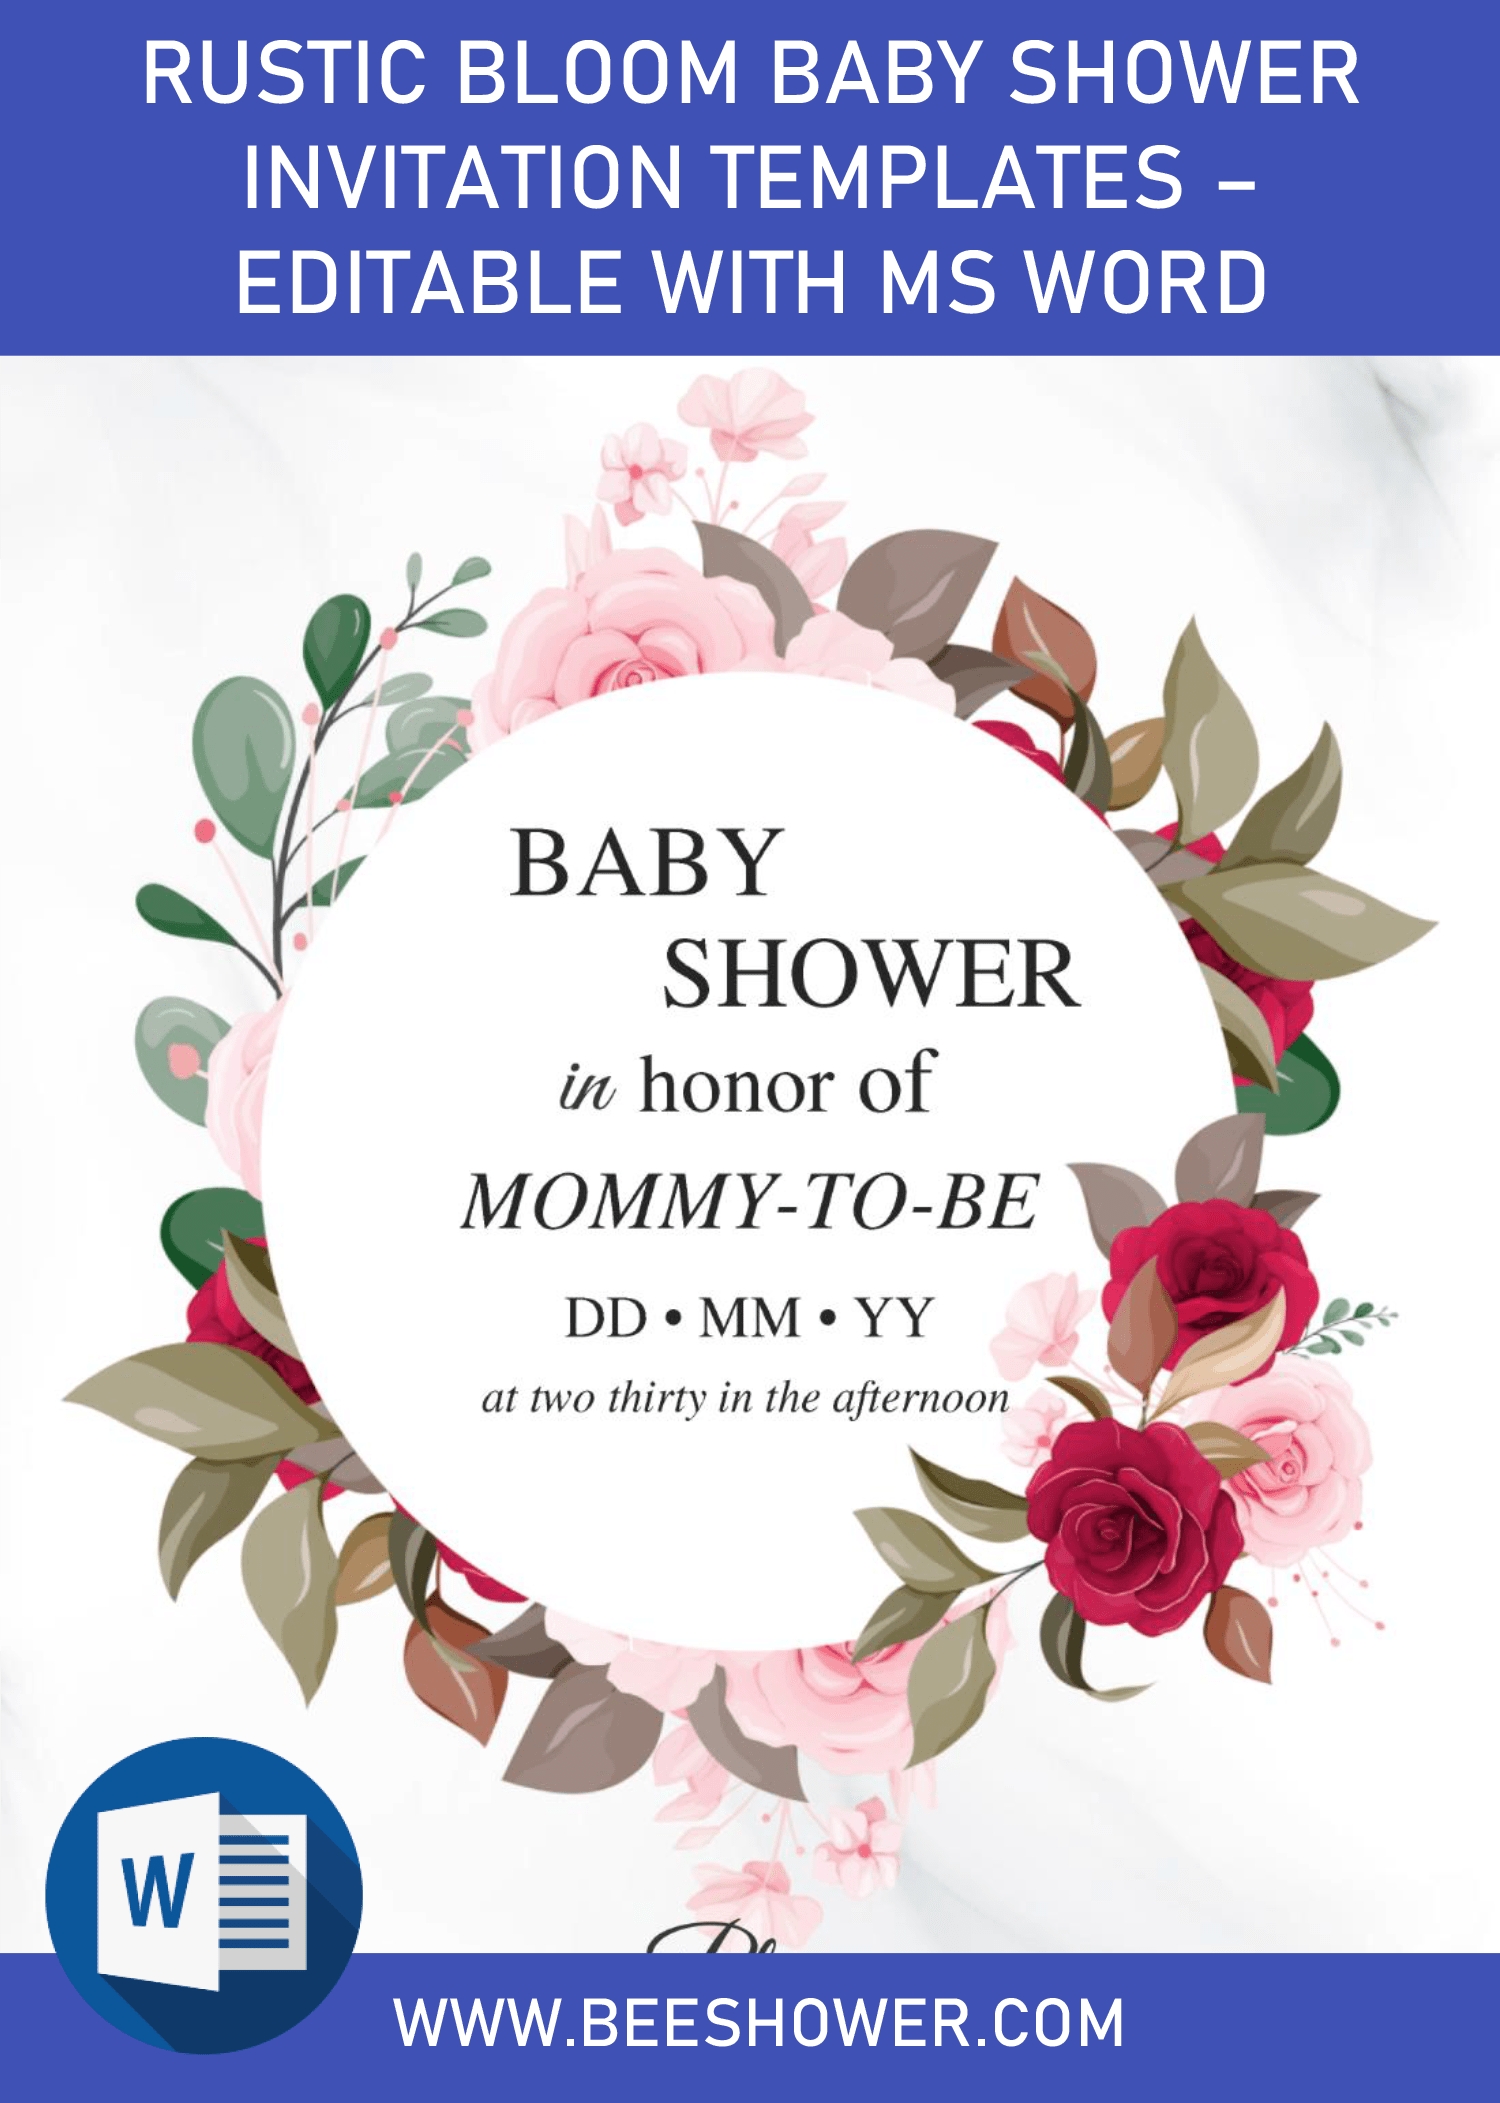 Rustic Bloom Baby Shower Invitation Templates - Editable With Ms Word Intended For Free Baby Shower Invitation Templates Microsoft Word